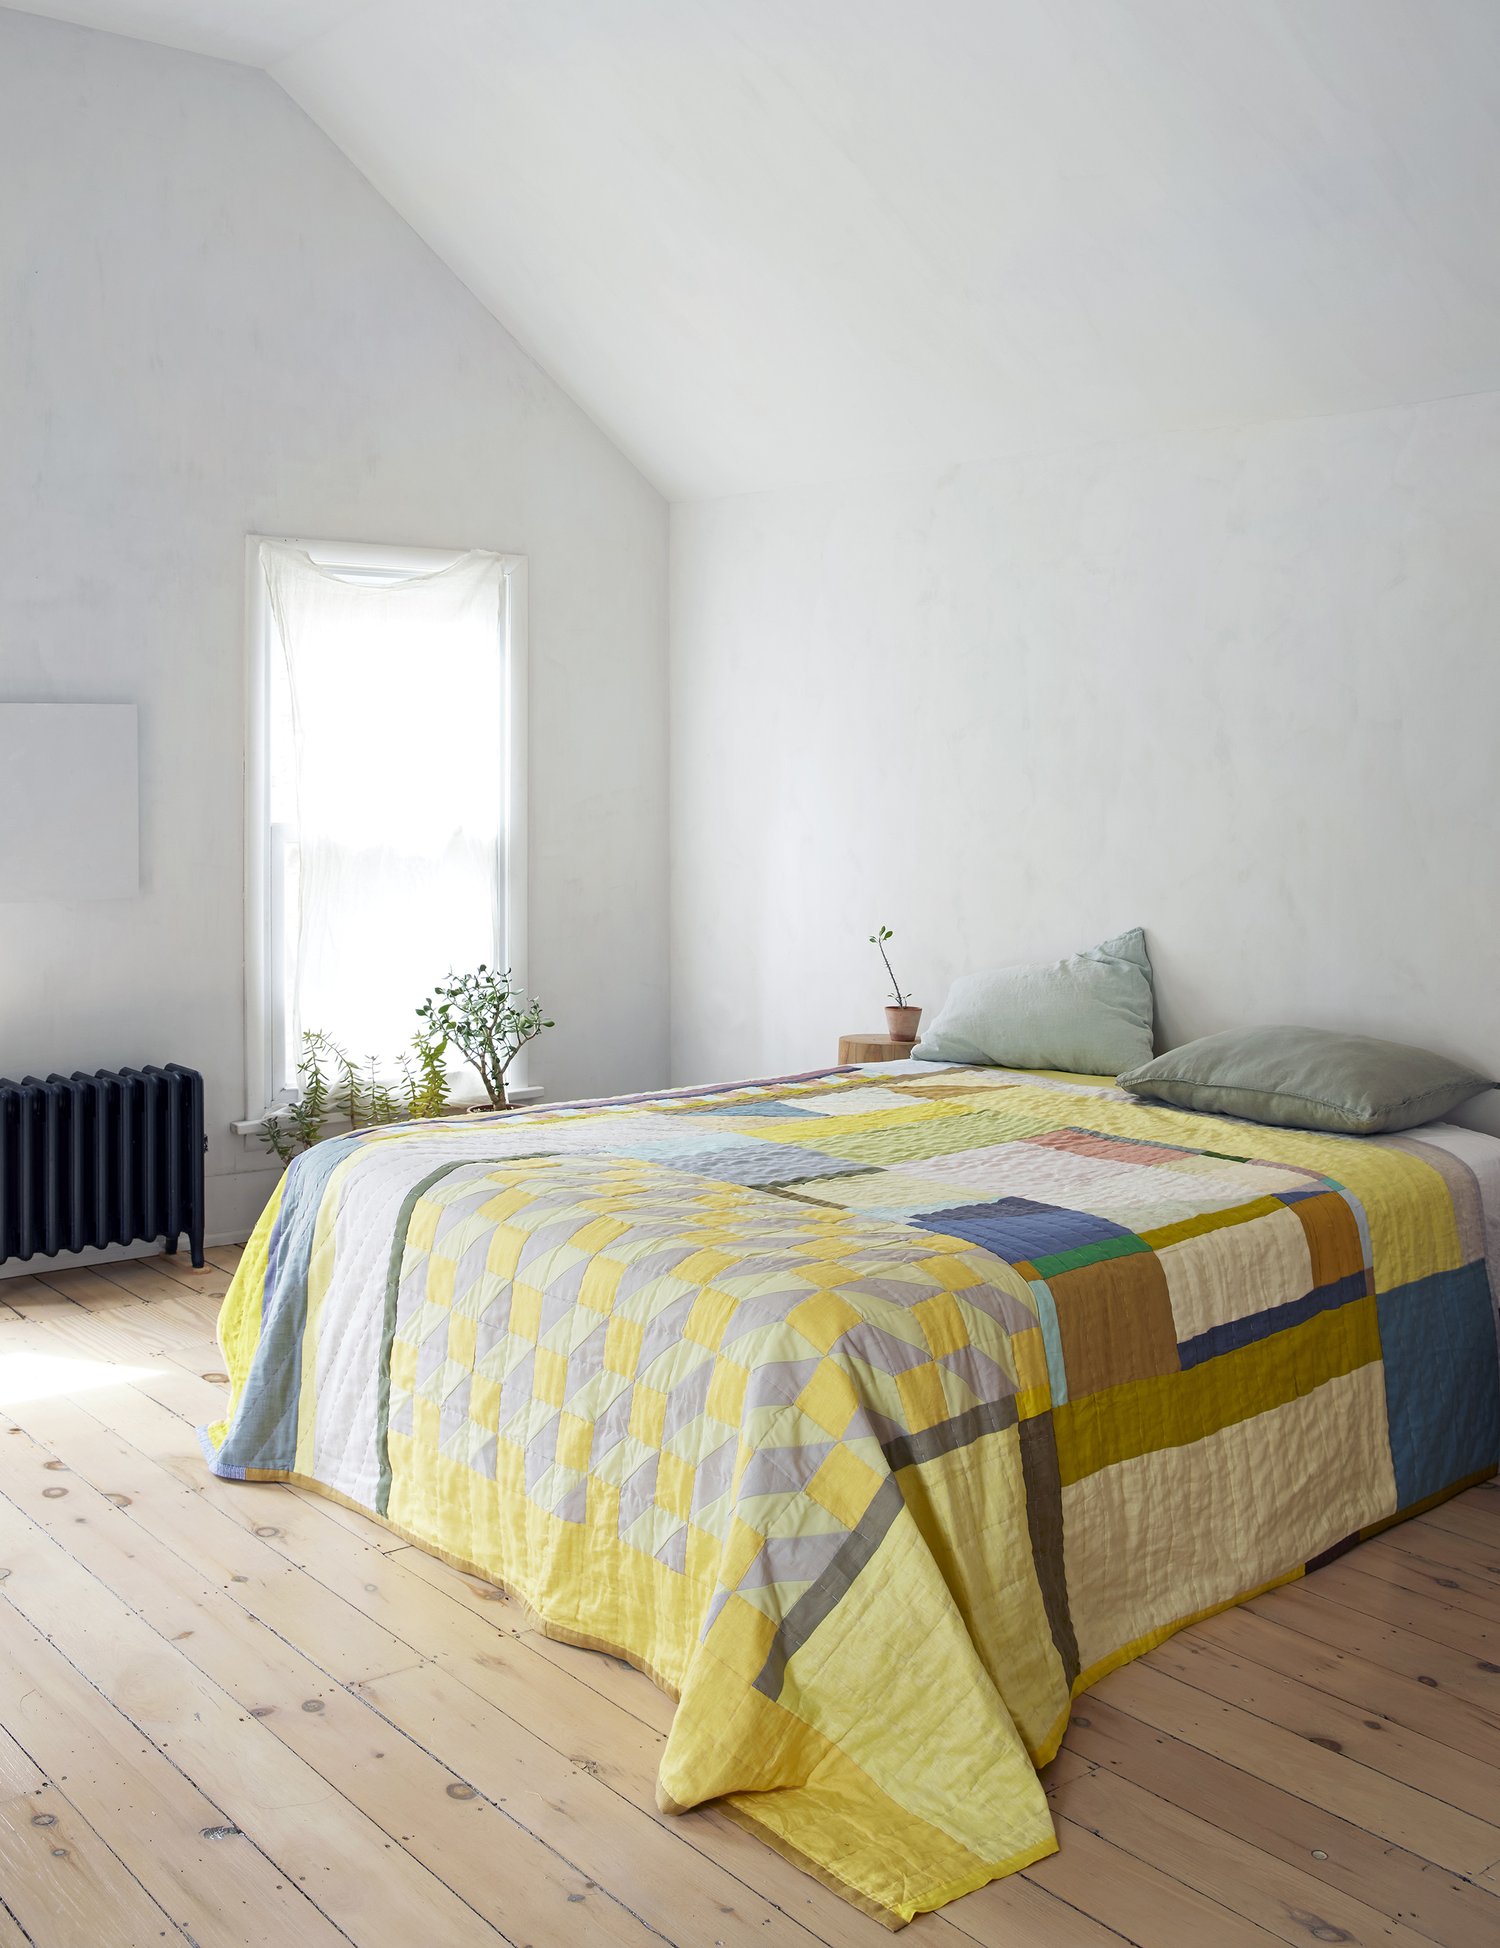 Made from Scraps: Colorful Quilts by Thompson Street Studio - Remodelista